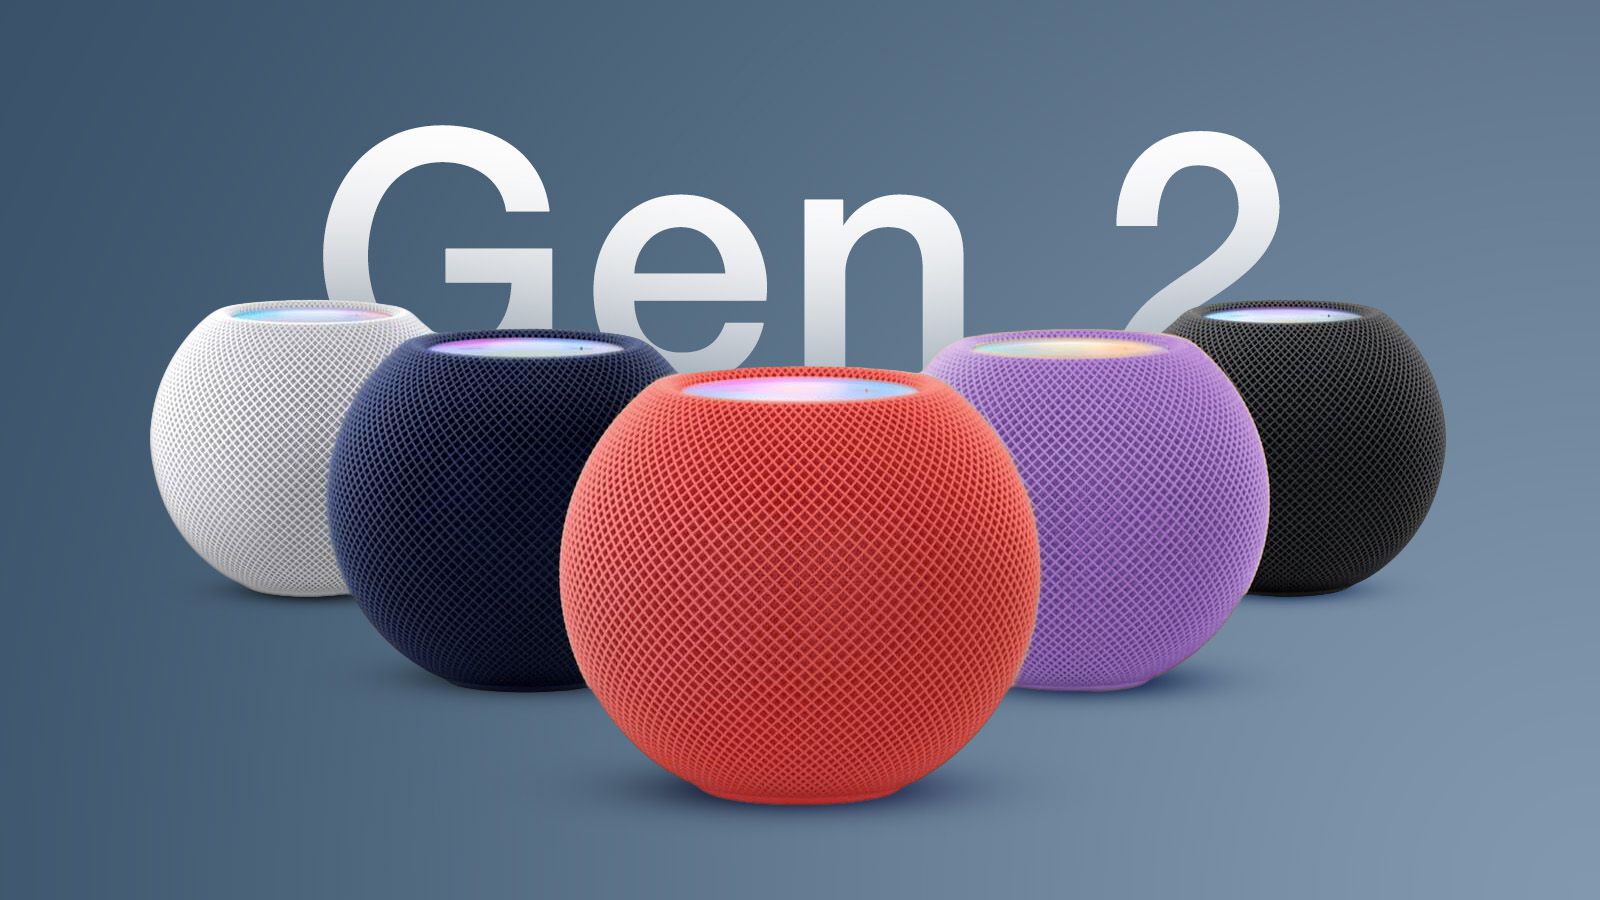 HomePod vs HomePod 2: Apple's latest large speaker does not contain  upgrades in all areas -  News